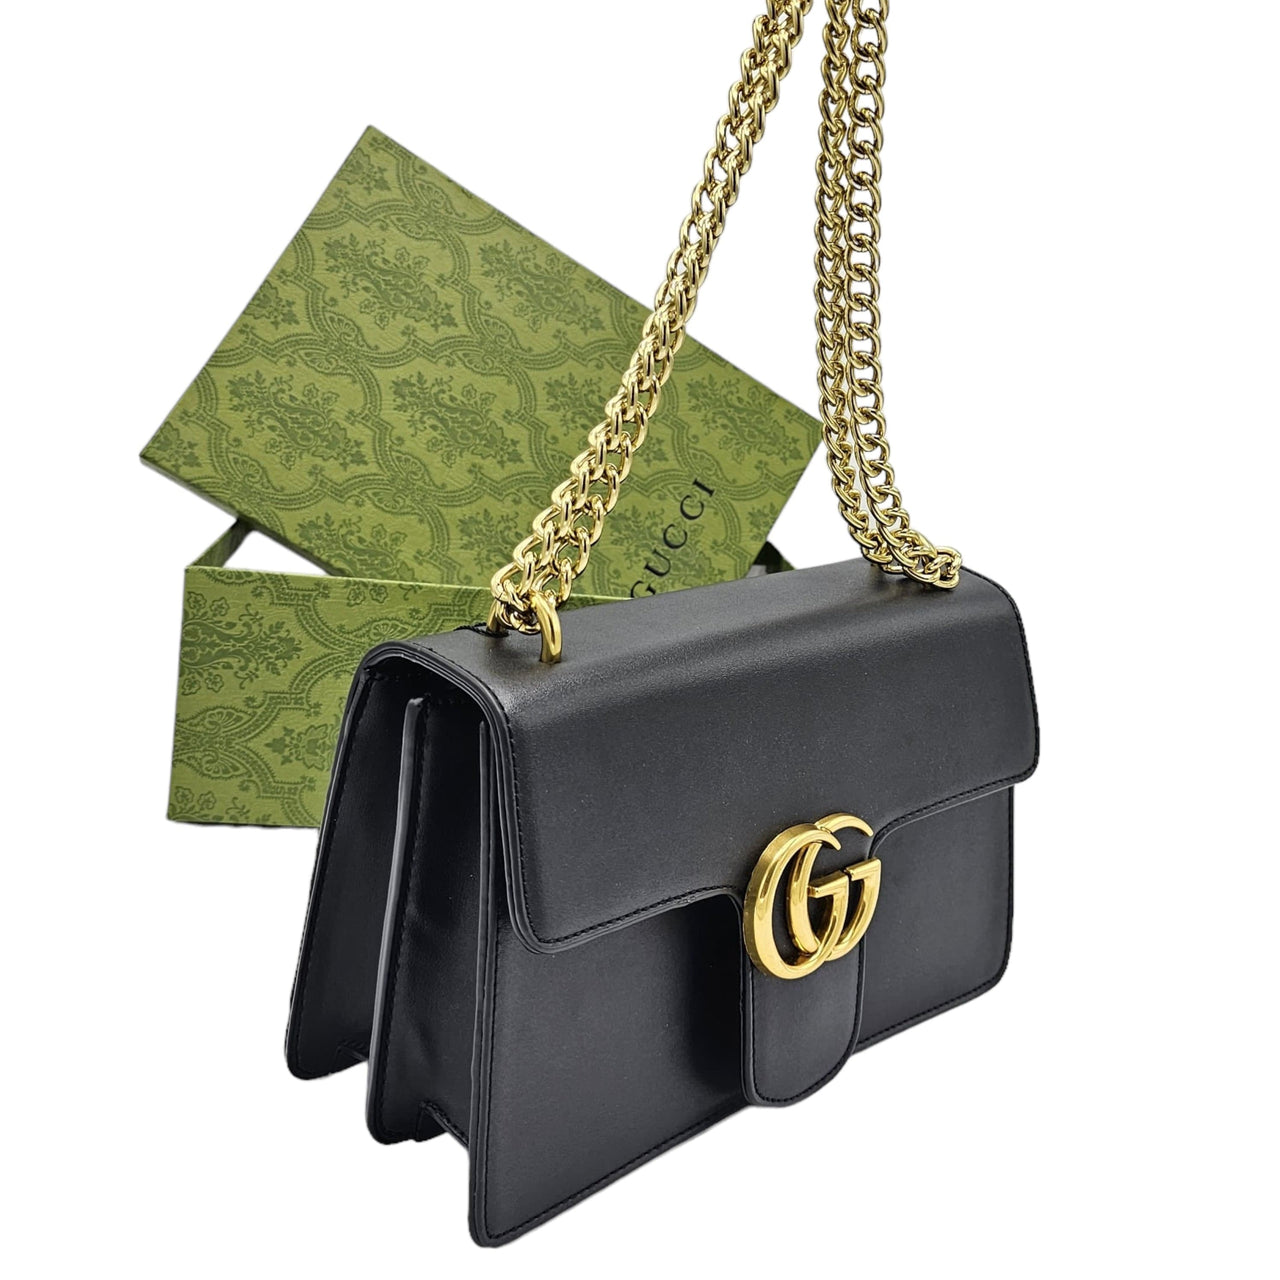 The Bag Couture Handbags, Wallets & Cases Gucci GG Marmont Chain Shoulder / Crossbody Bag Black